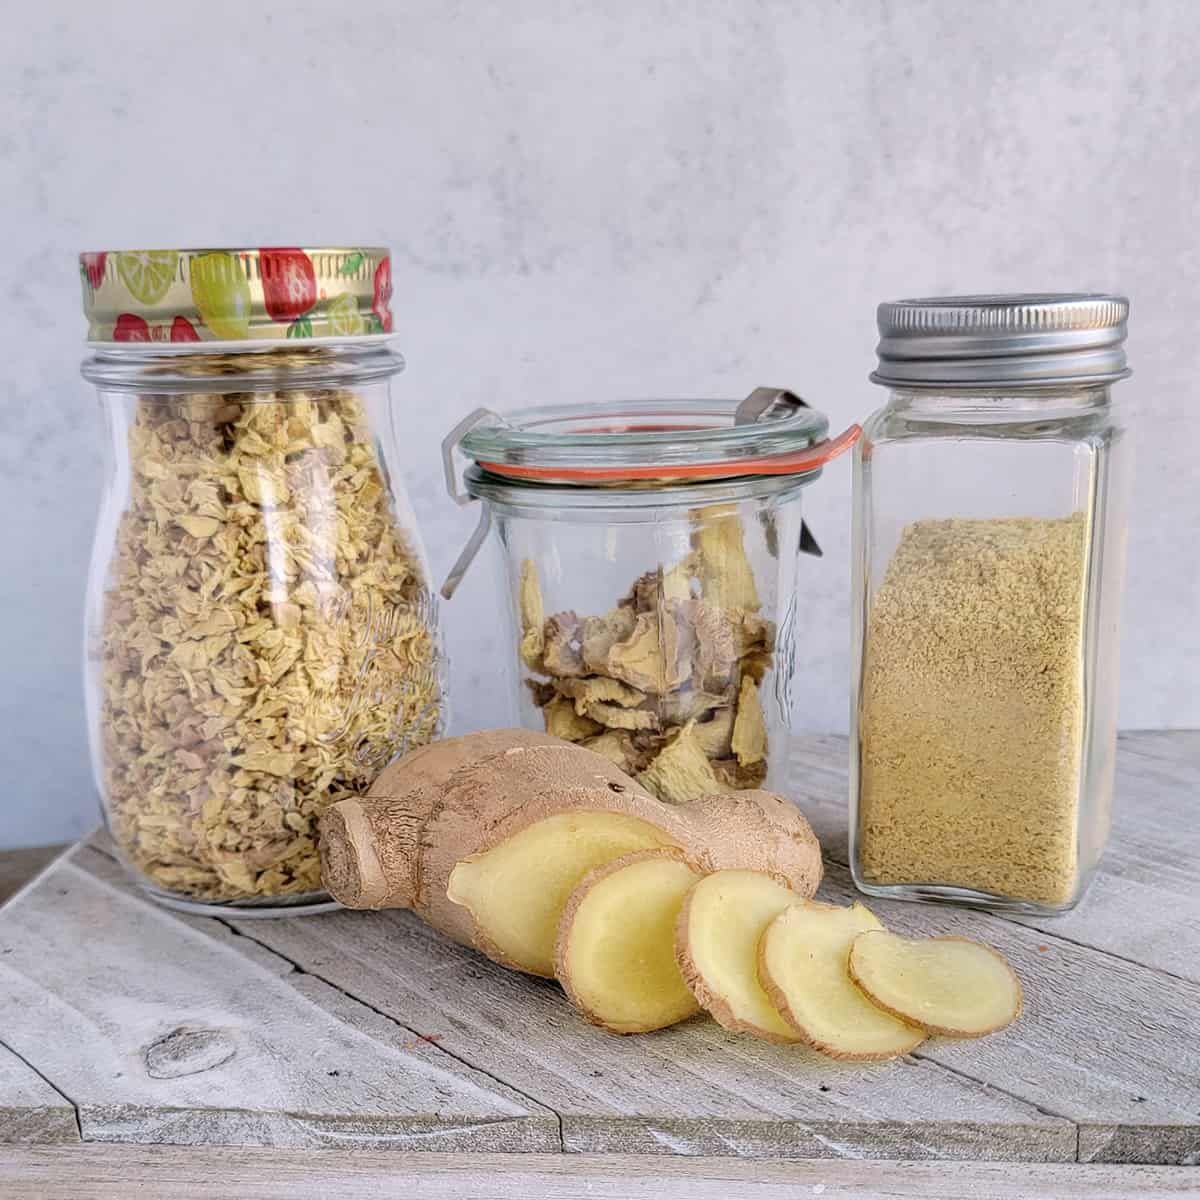 https://www.thepurposefulpantry.com/wp-content/uploads/2021/08/how-to-dehydrate-ginger-Feat1.jpg